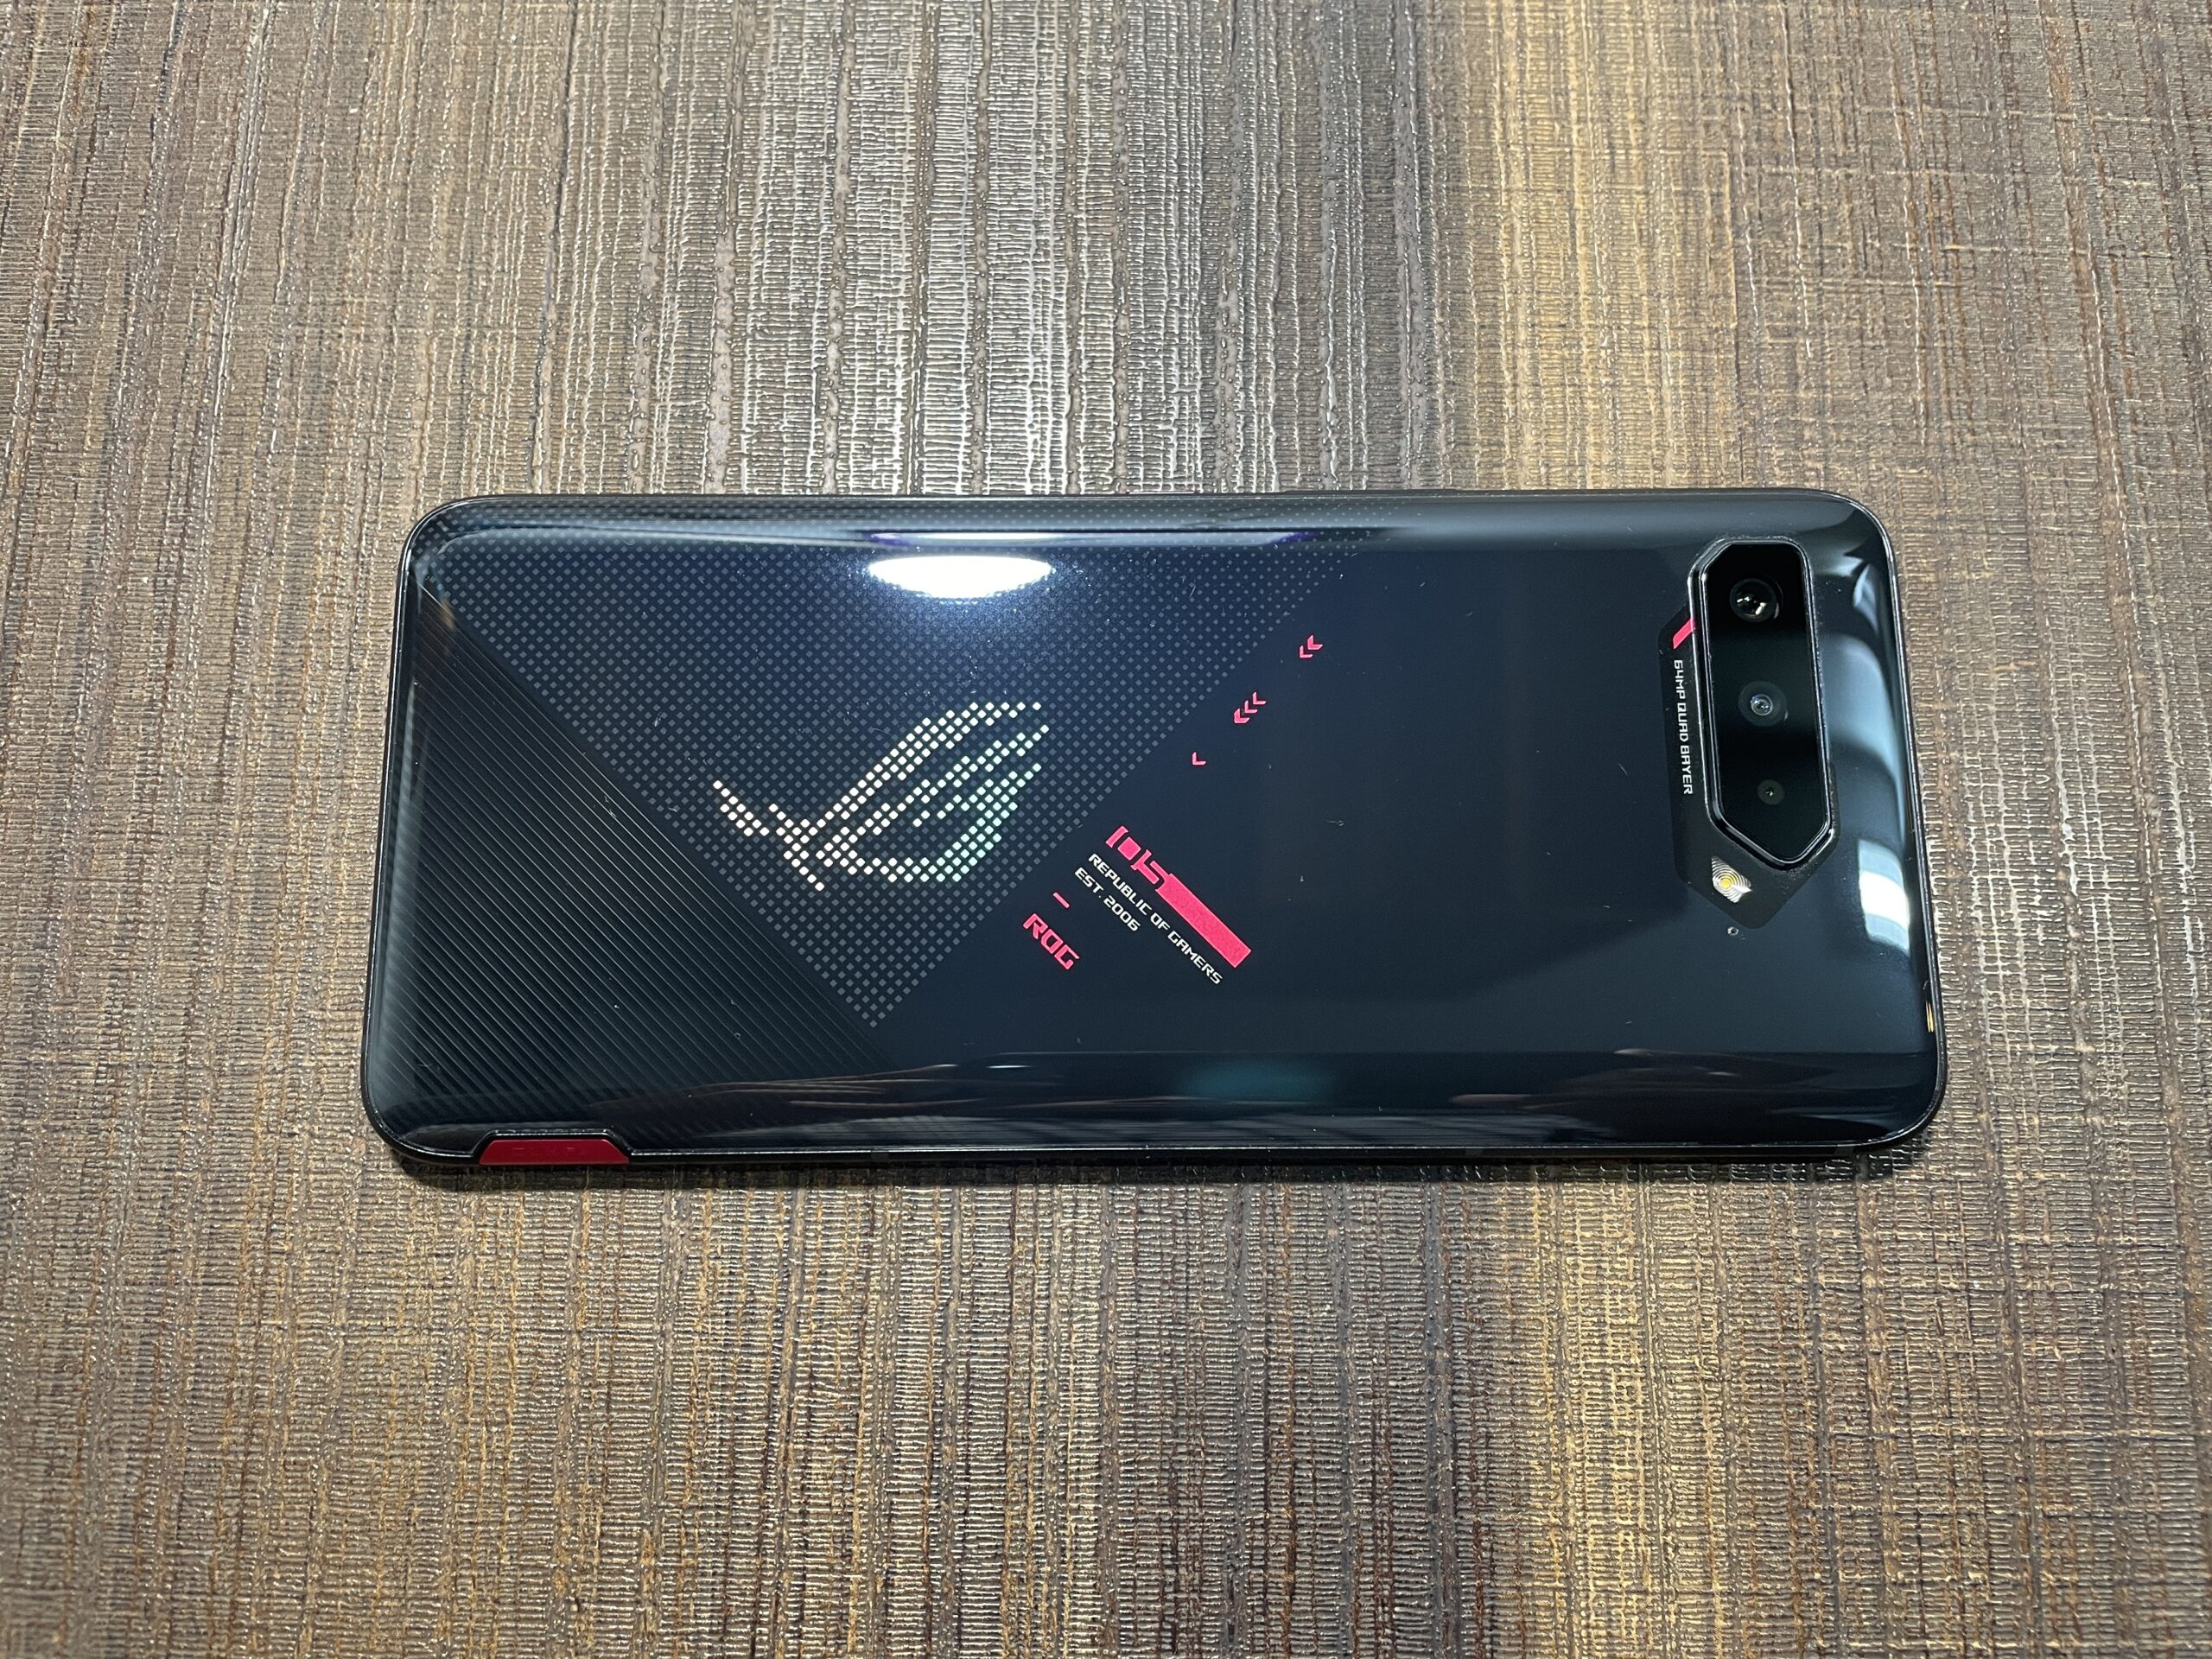 ROG 5 Smartphone made for Gamers by the Gamers.